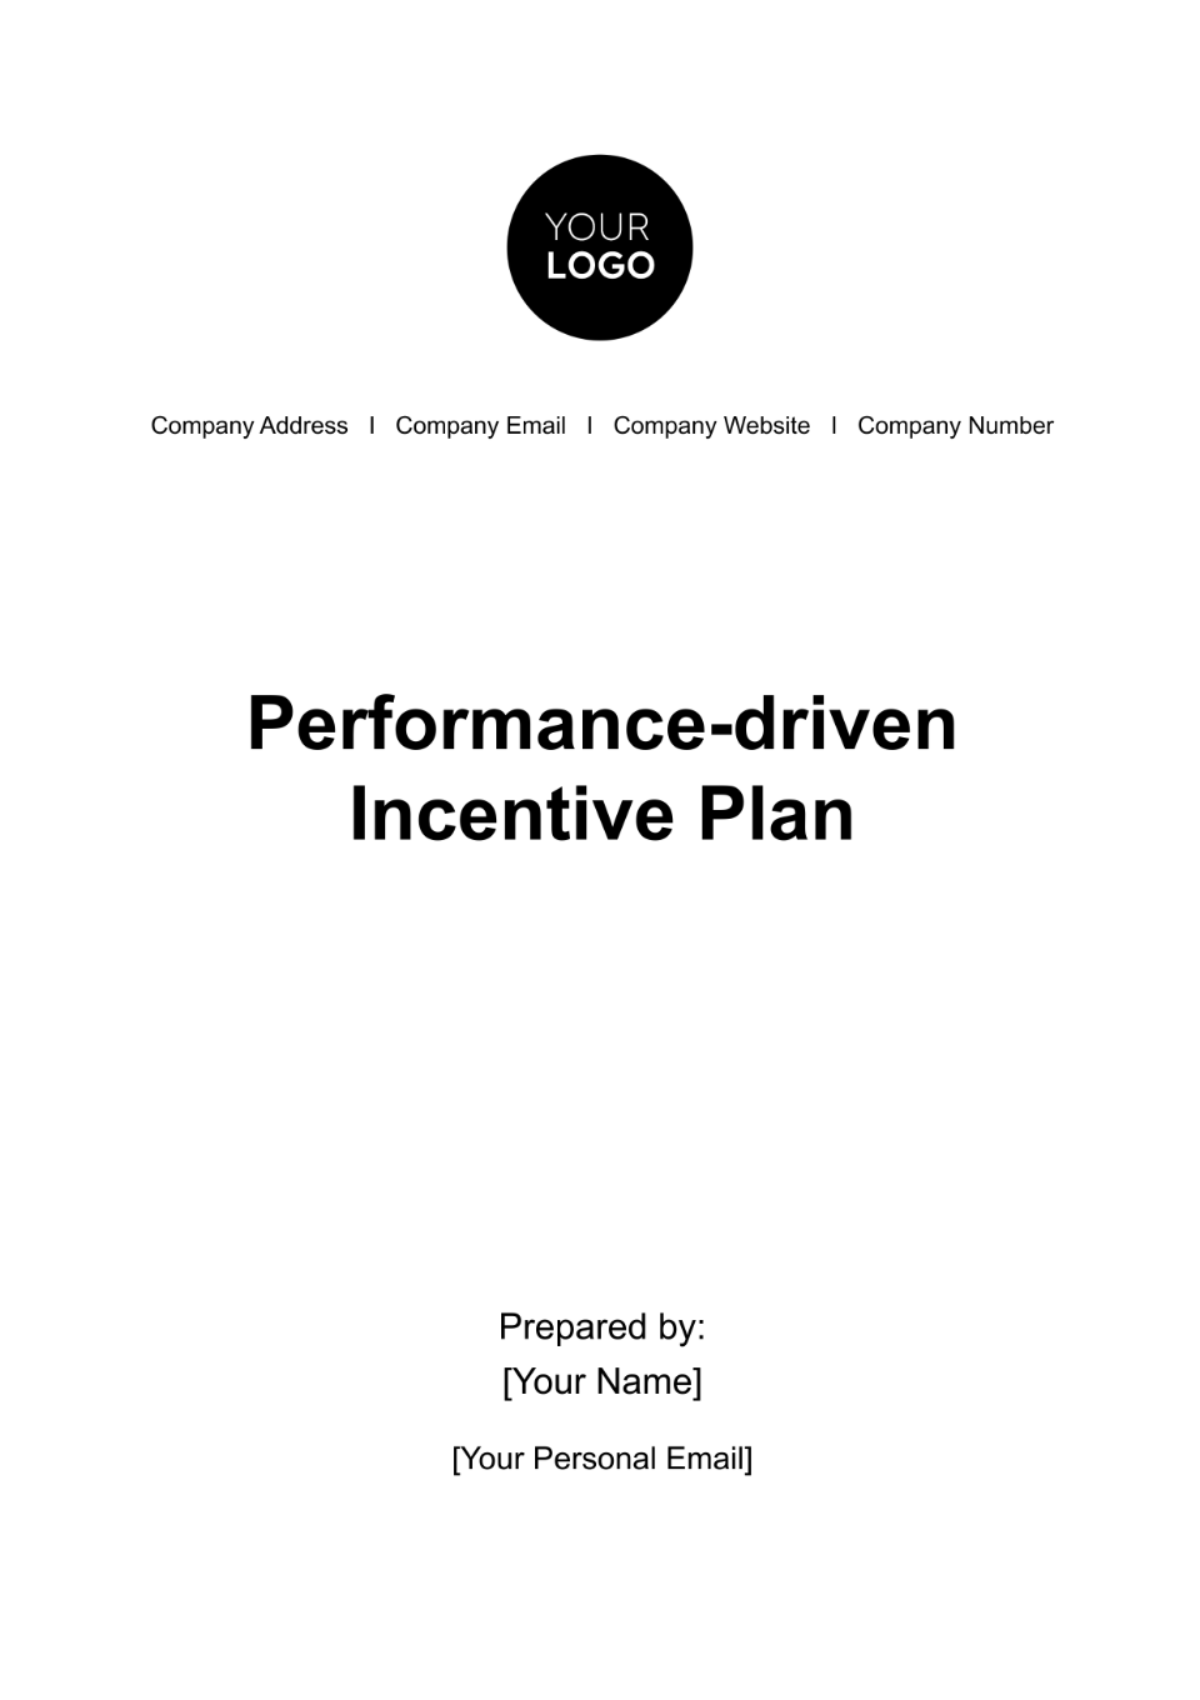 Free Performance-driven Incentive Plan HR Template